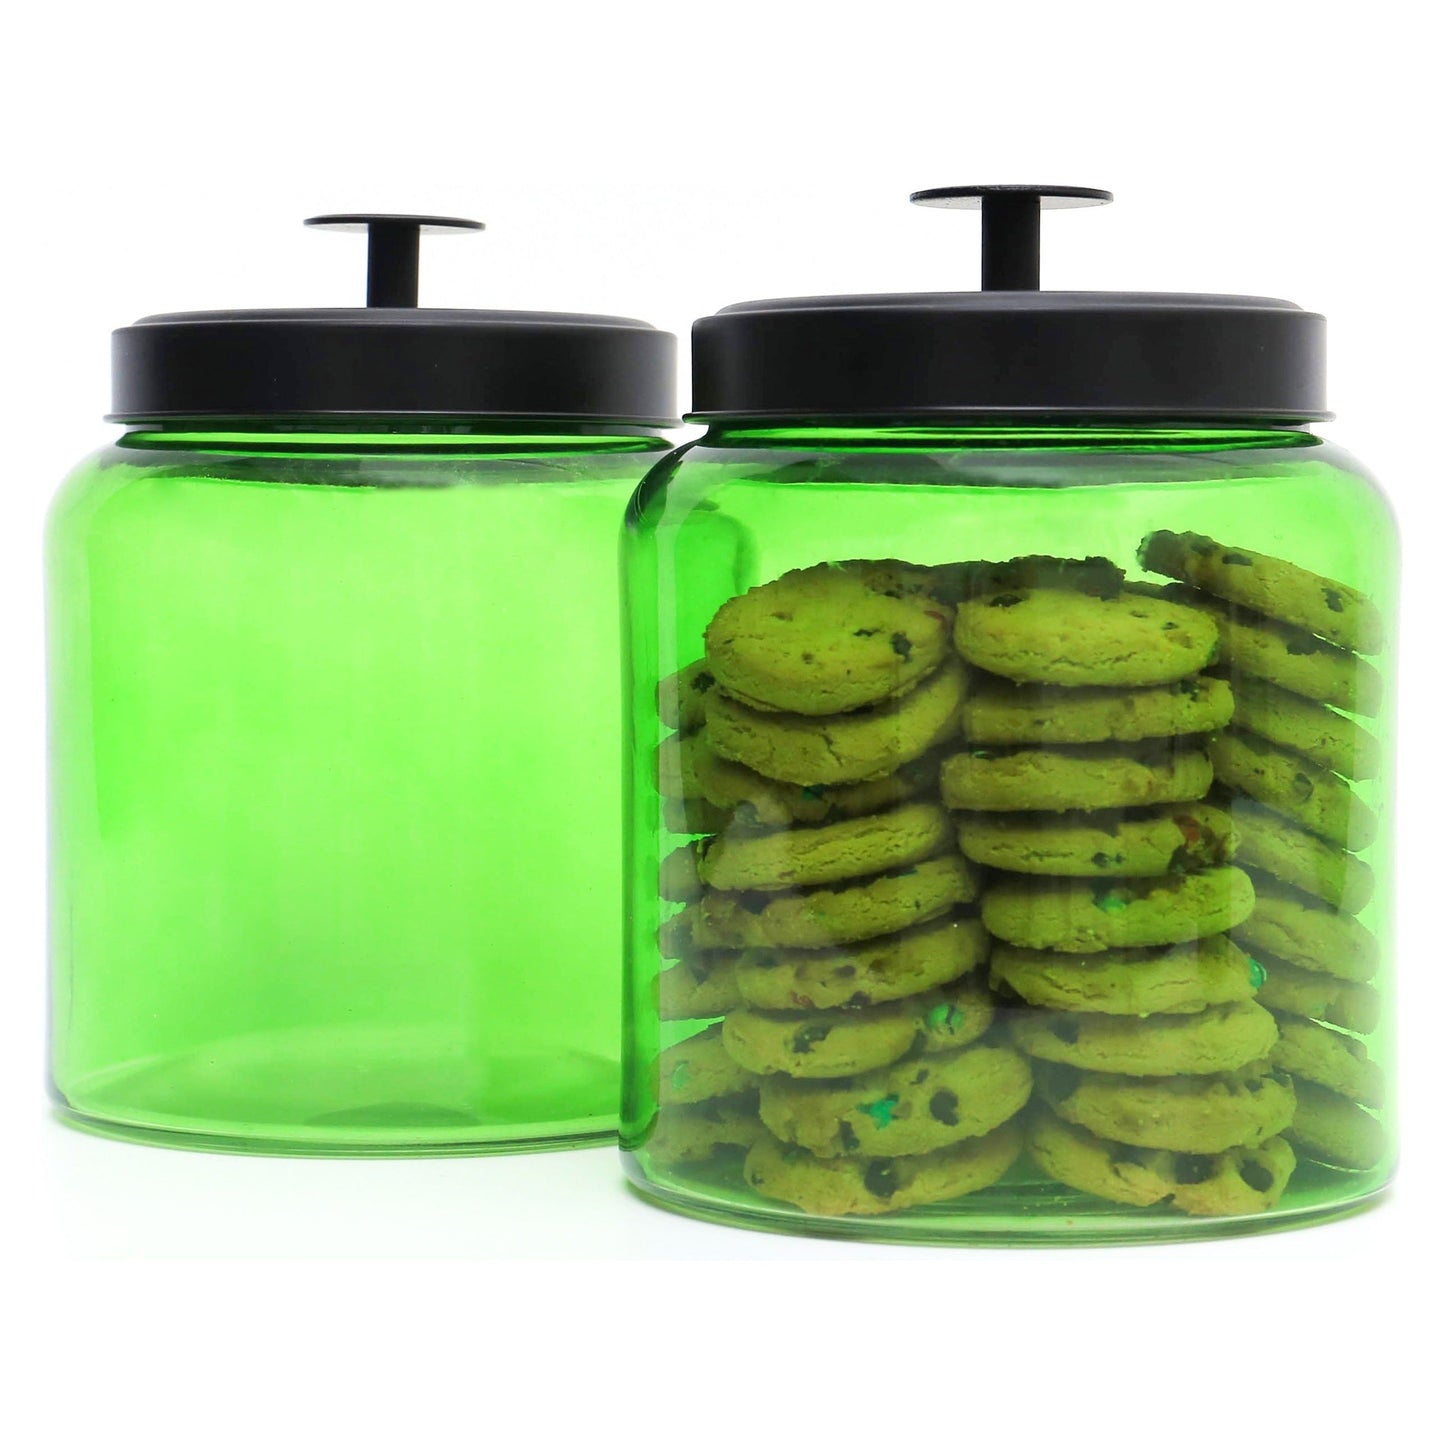 Half Gallon Colored Cookie Jars - Pack of 2